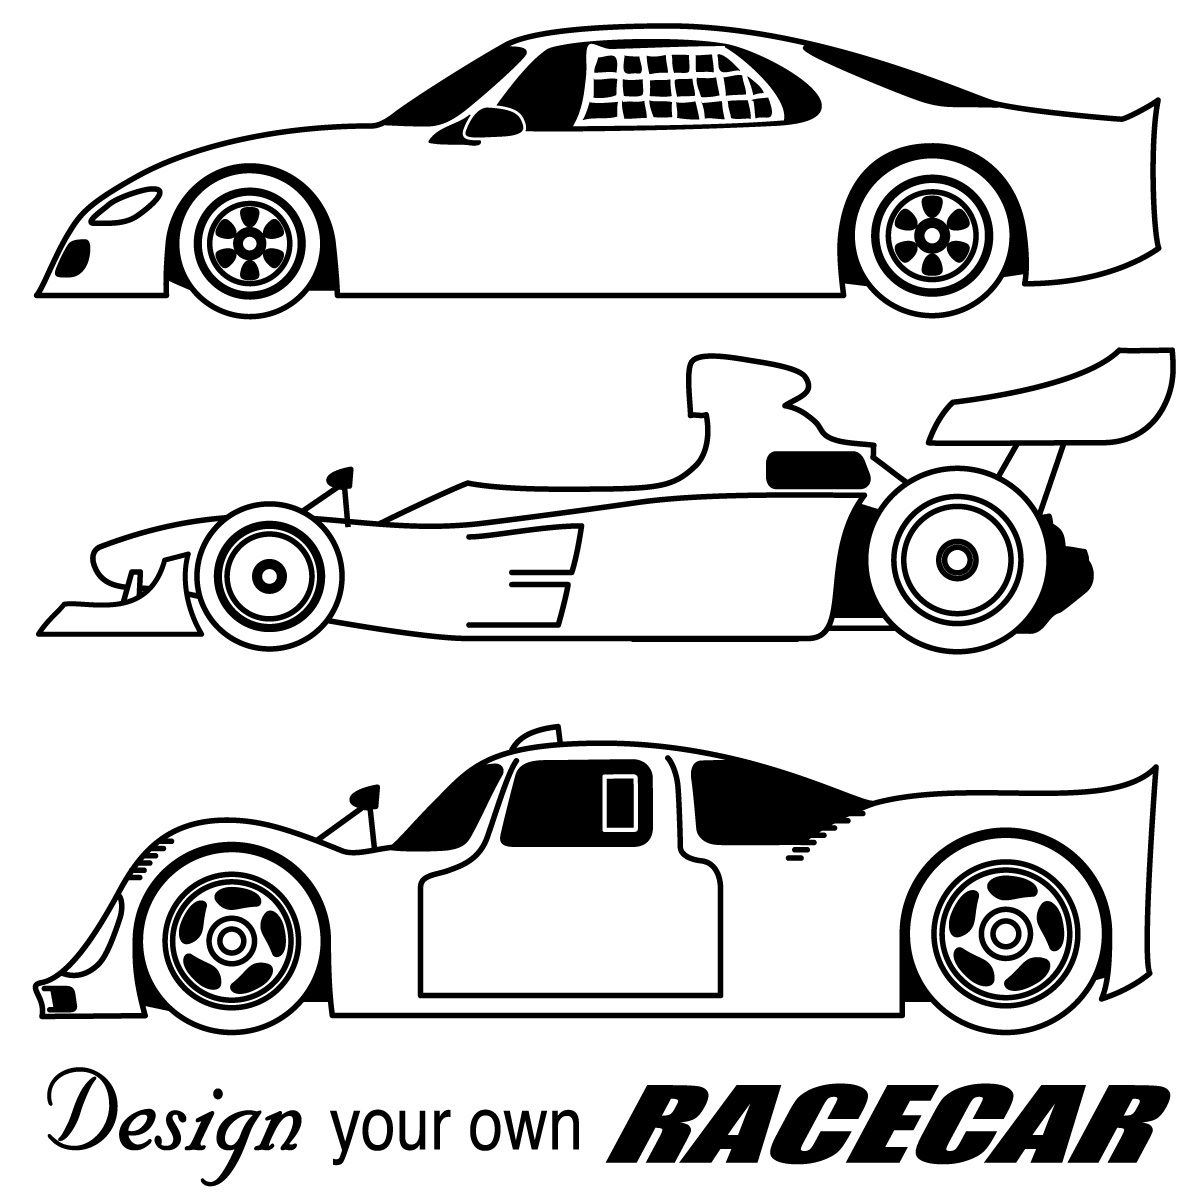 Racing car clipart colouring